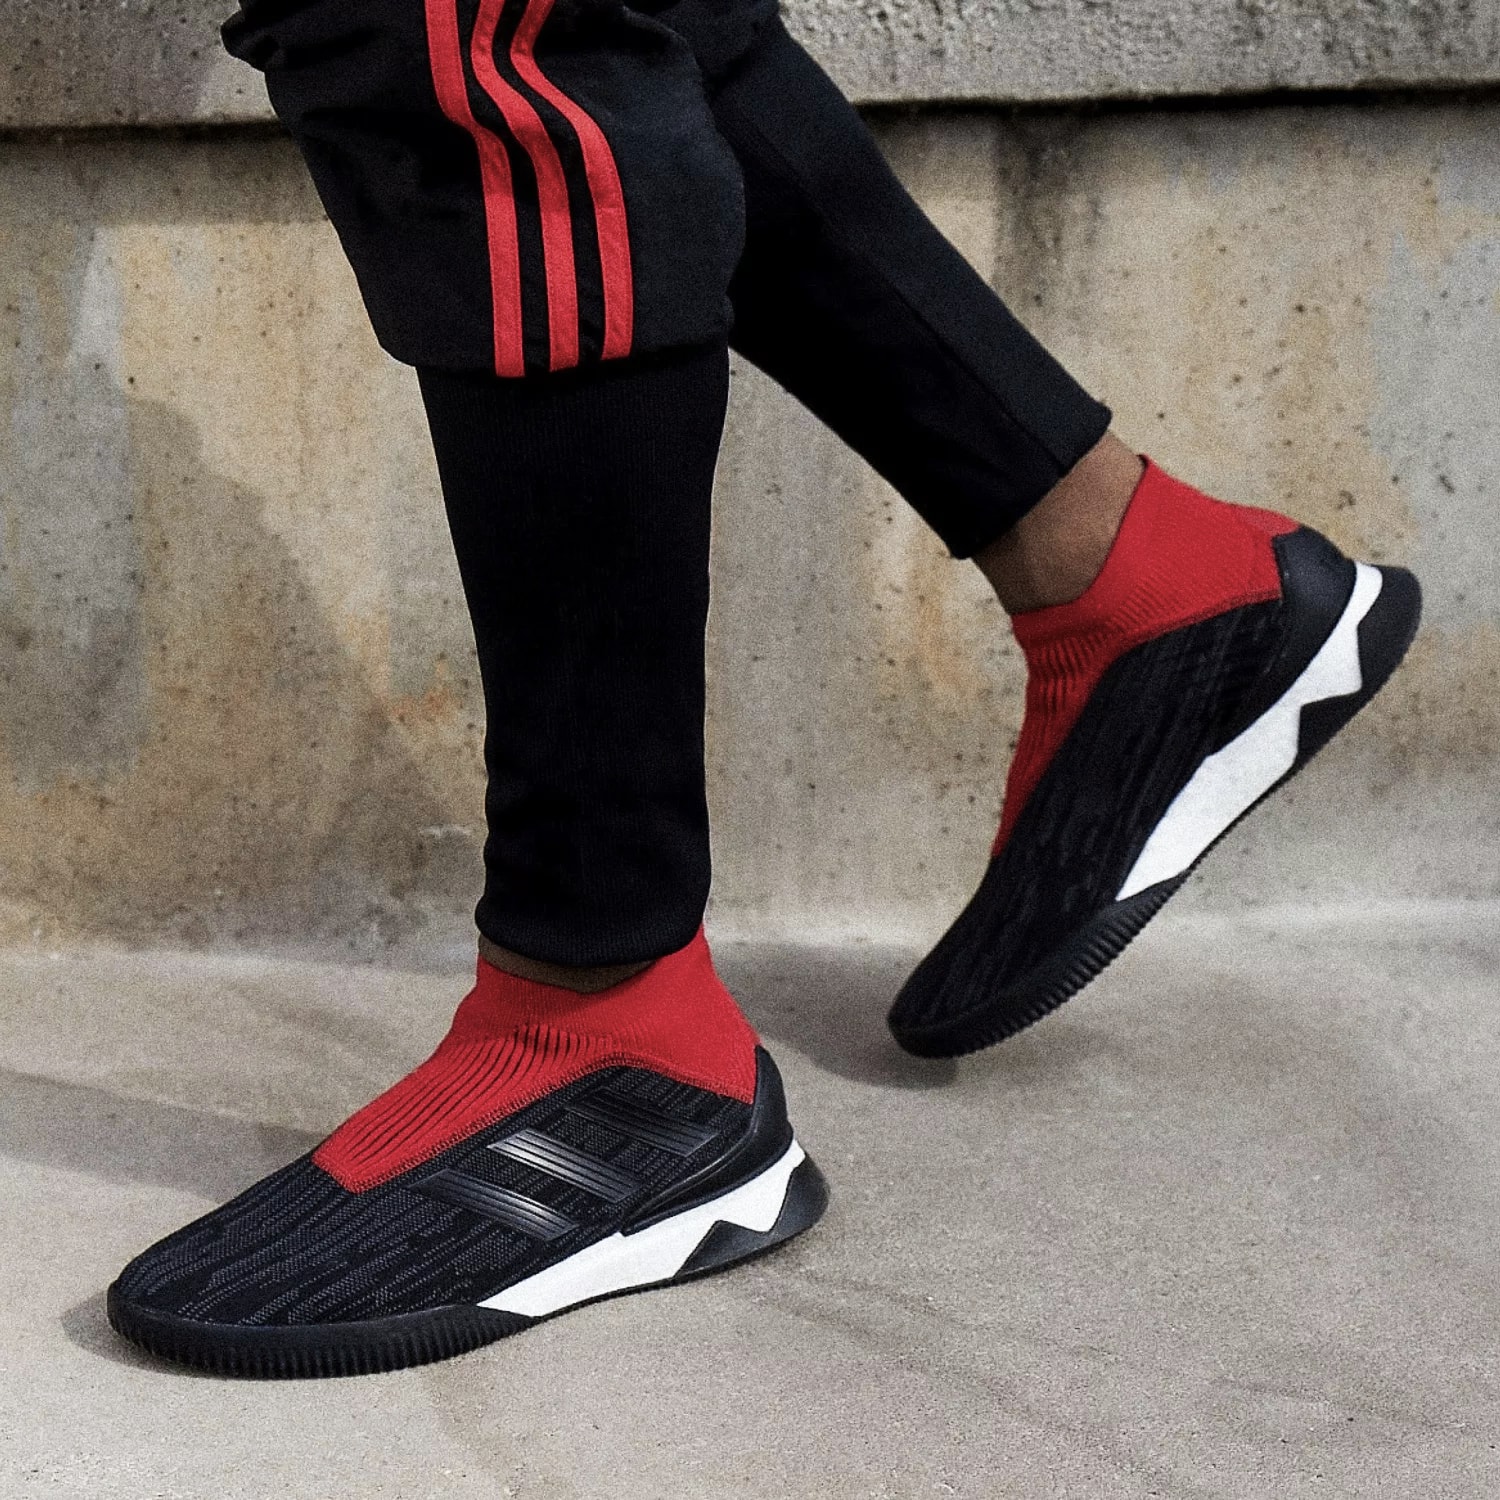 adidas Football Predator Tango 18+ TR Release Details Shoes Trainers Sneakers Kicks Cop Purchase Buy Red Black White Colorway